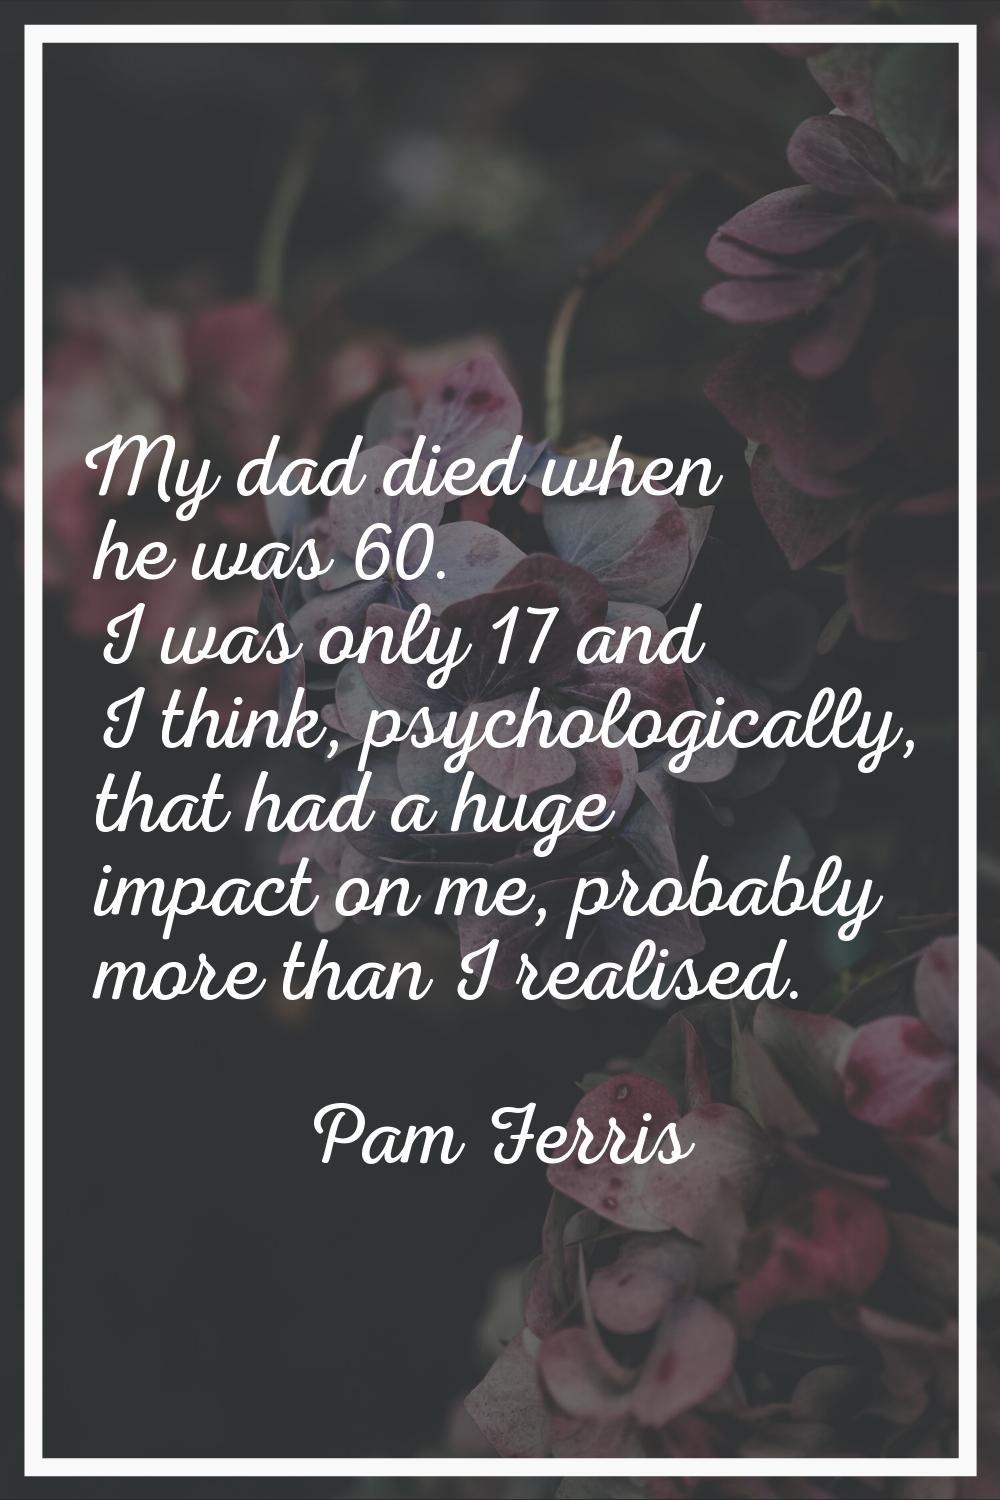 My dad died when he was 60. I was only 17 and I think, psychologically, that had a huge impact on m